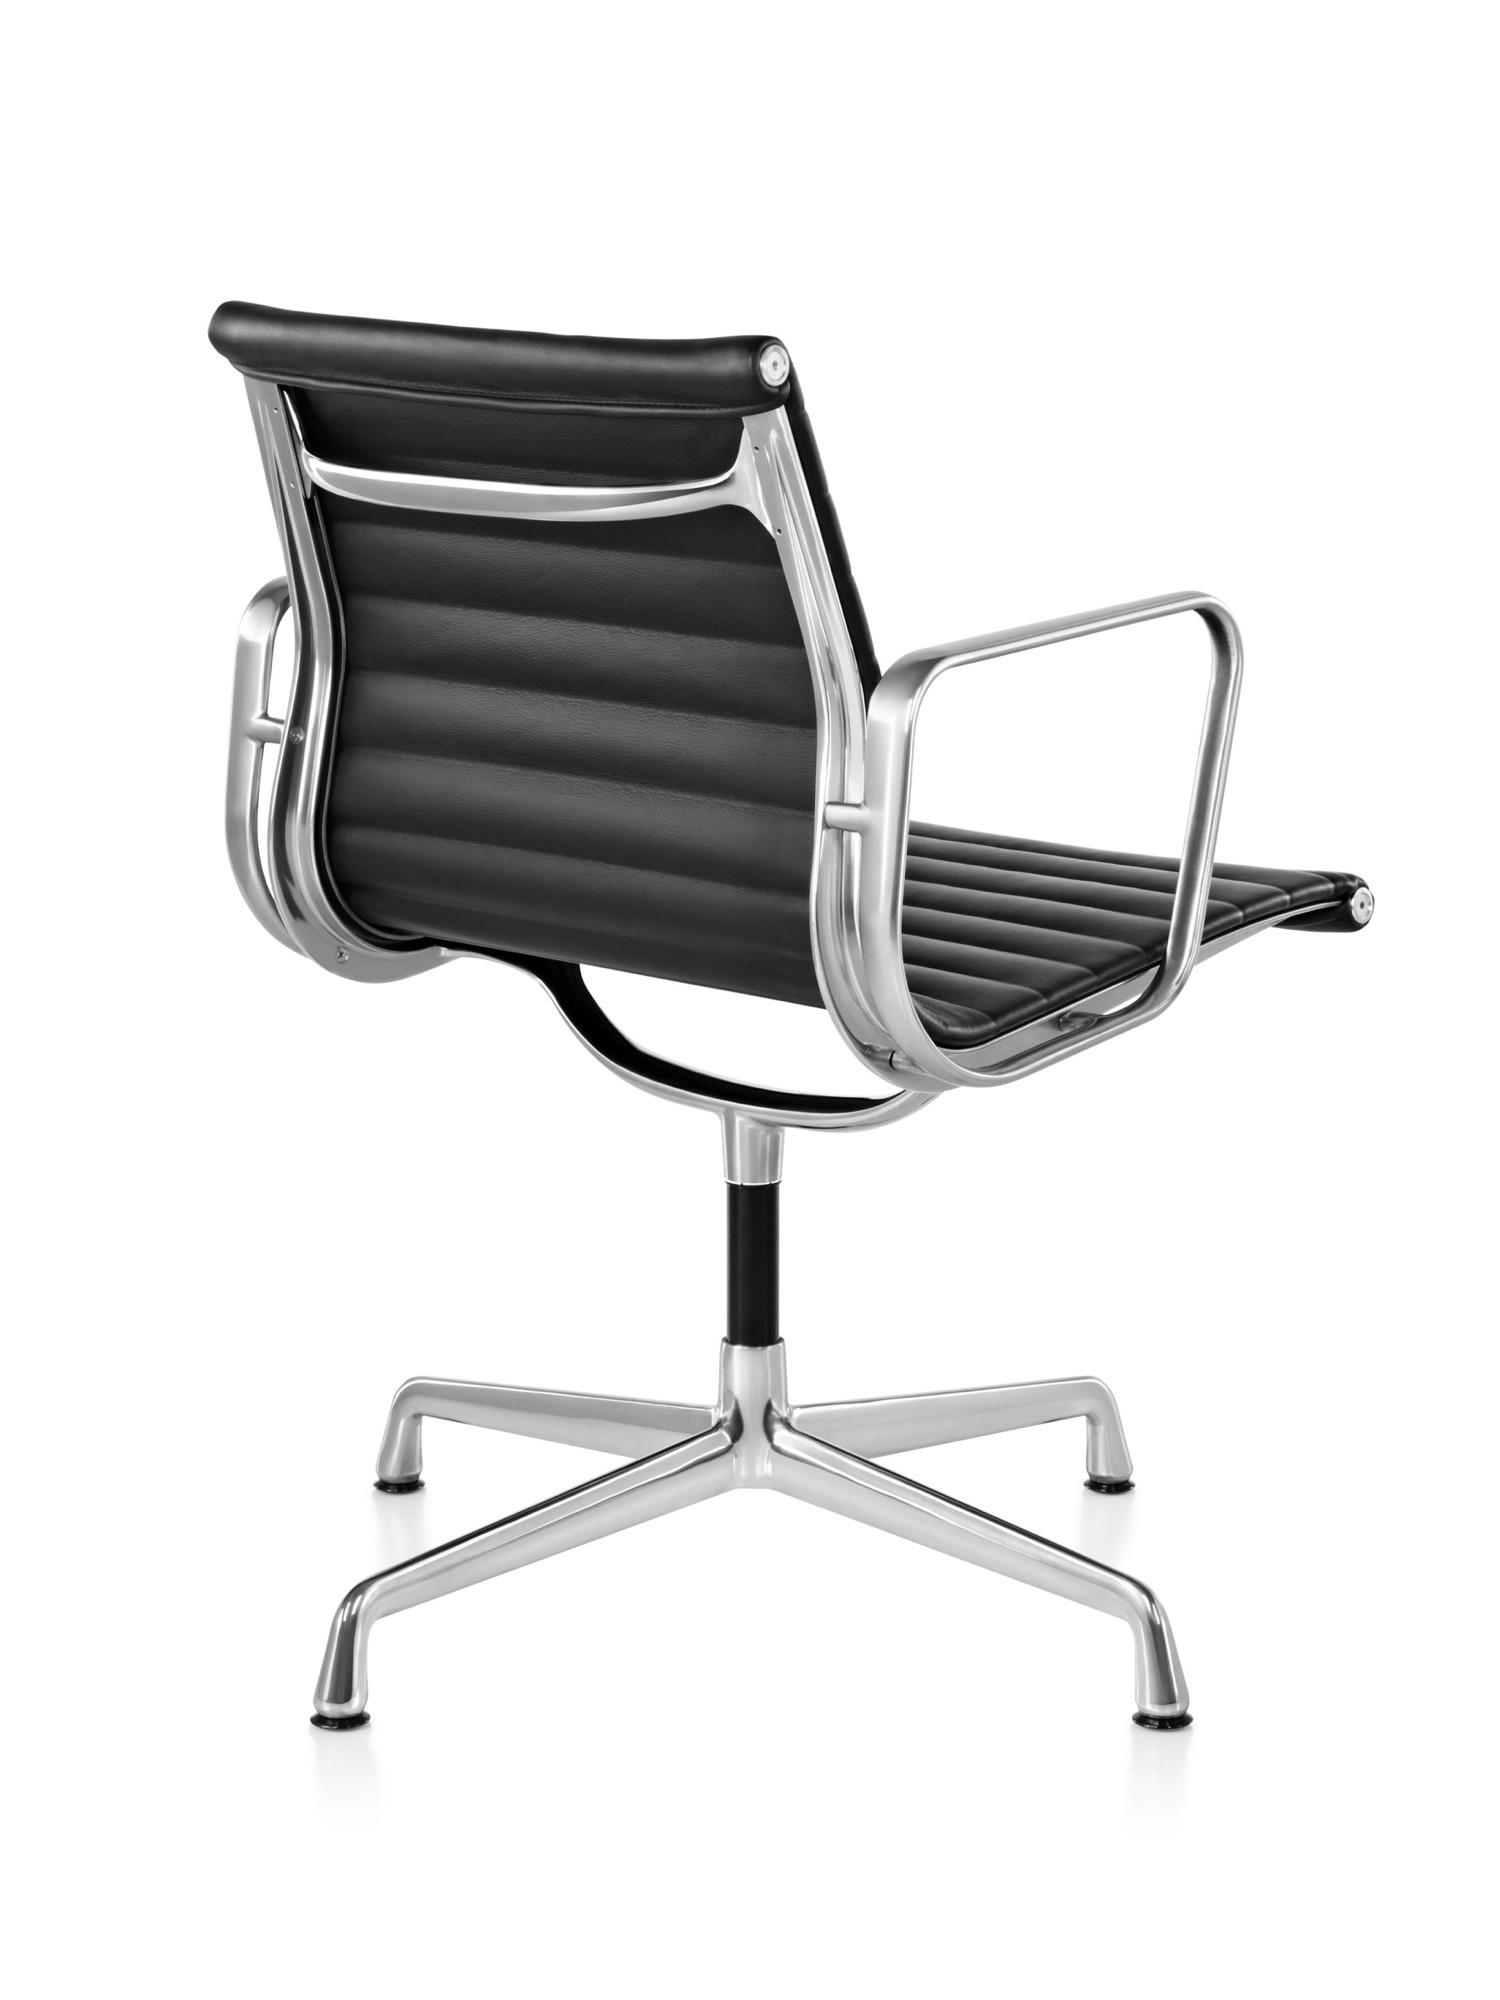 Quality Low Back Ribbed Leather Chair EA108 Aluminum Group Charles Eames Style wholesale